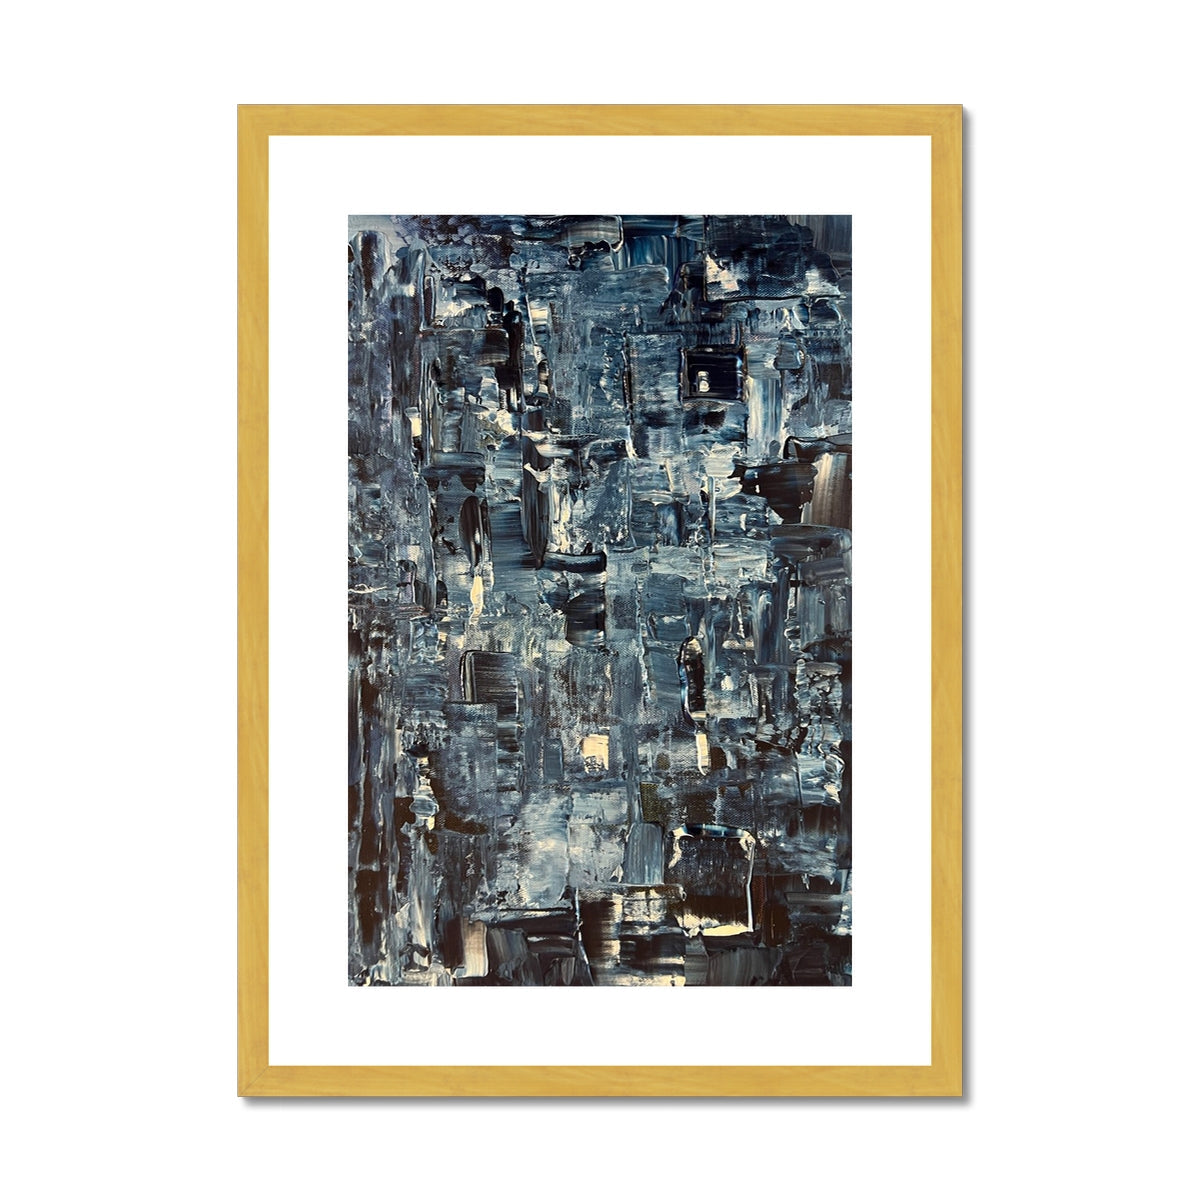 Inception Abstract Painting | Antique Framed & Mounted Prints From Scotland-Antique Framed & Mounted Prints-Abstract & Impressionistic Art Gallery-A2 Portrait-Gold Frame-Paintings, Prints, Homeware, Art Gifts From Scotland By Scottish Artist Kevin Hunter